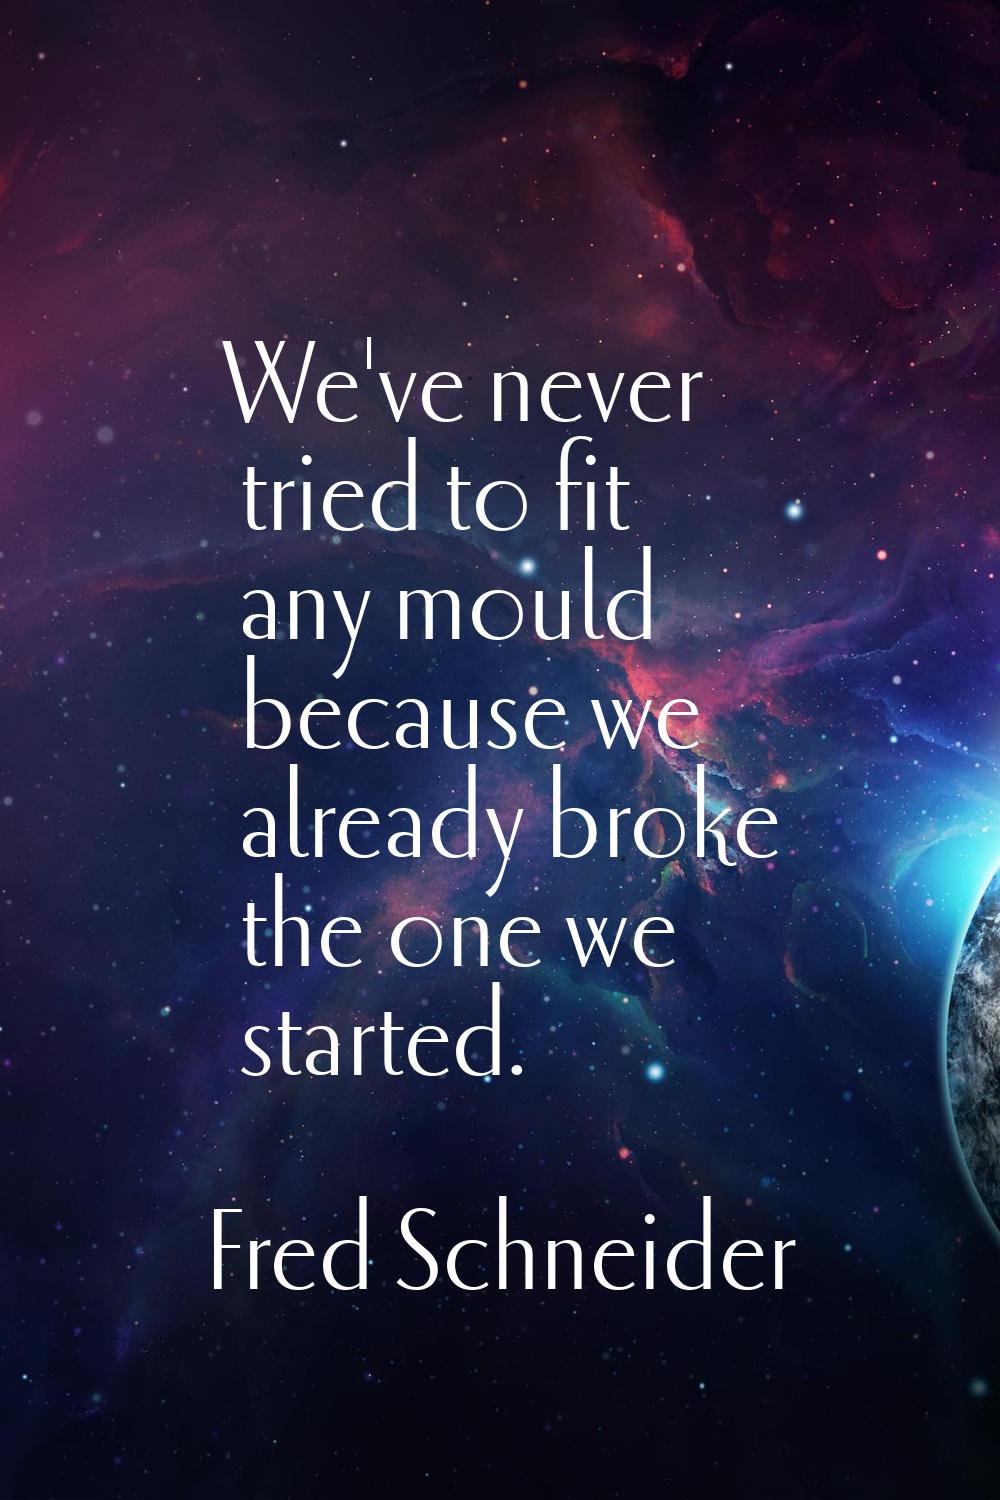 We've never tried to fit any mould because we already broke the one we started.